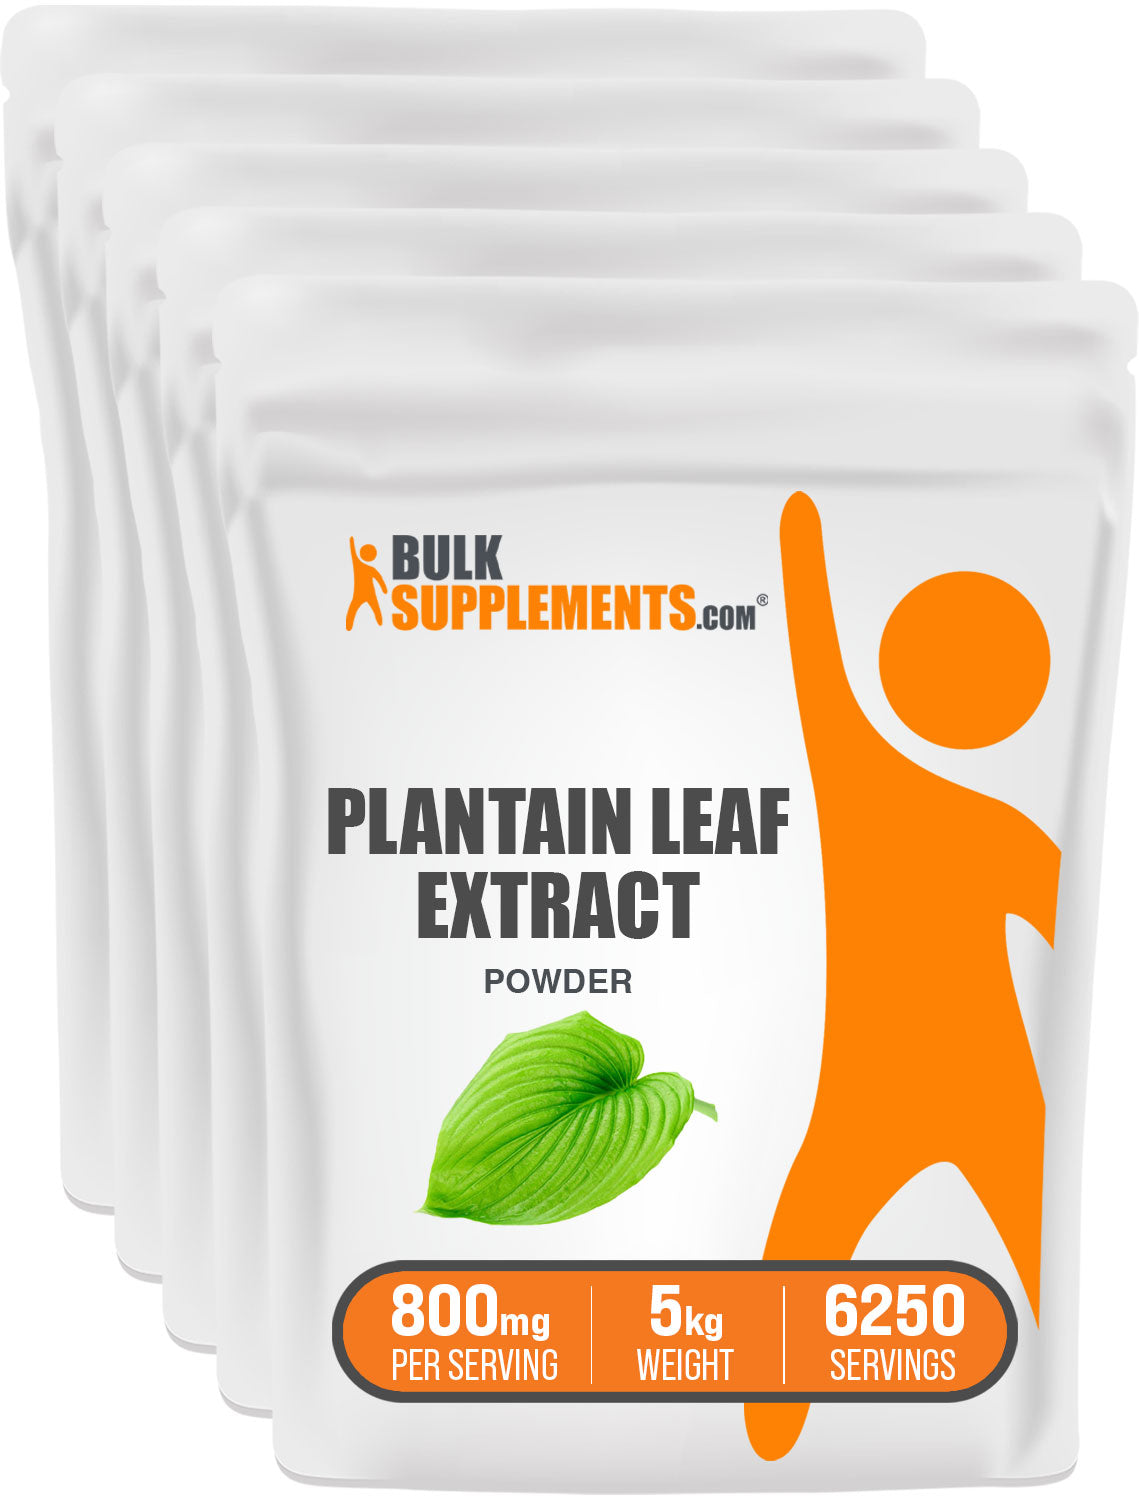 BulkSupplements Plantain Leaf Extract 5kg bags